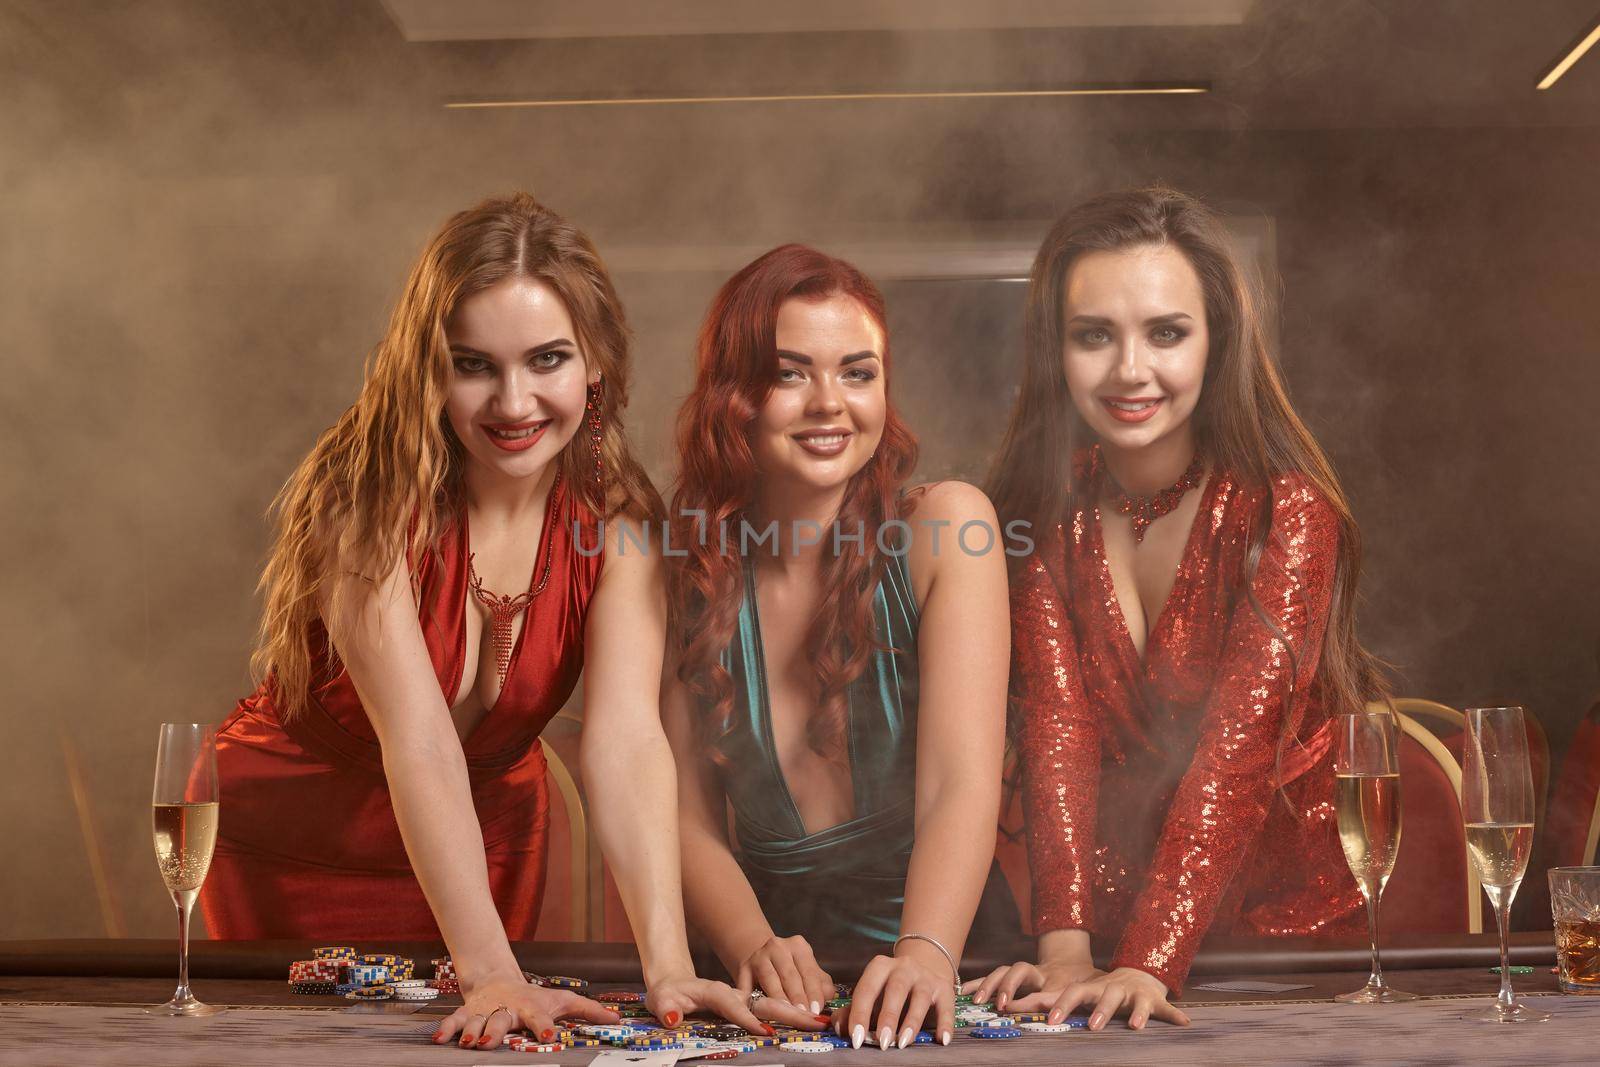 Three beautiful girls in a sexy dresses are playing poker at casino. They are celebrating their win, looking at the camera and smiling, holding some chips and posing at the table against a smoke background. Cards, money, alcohol, gambling, entertainment concept.